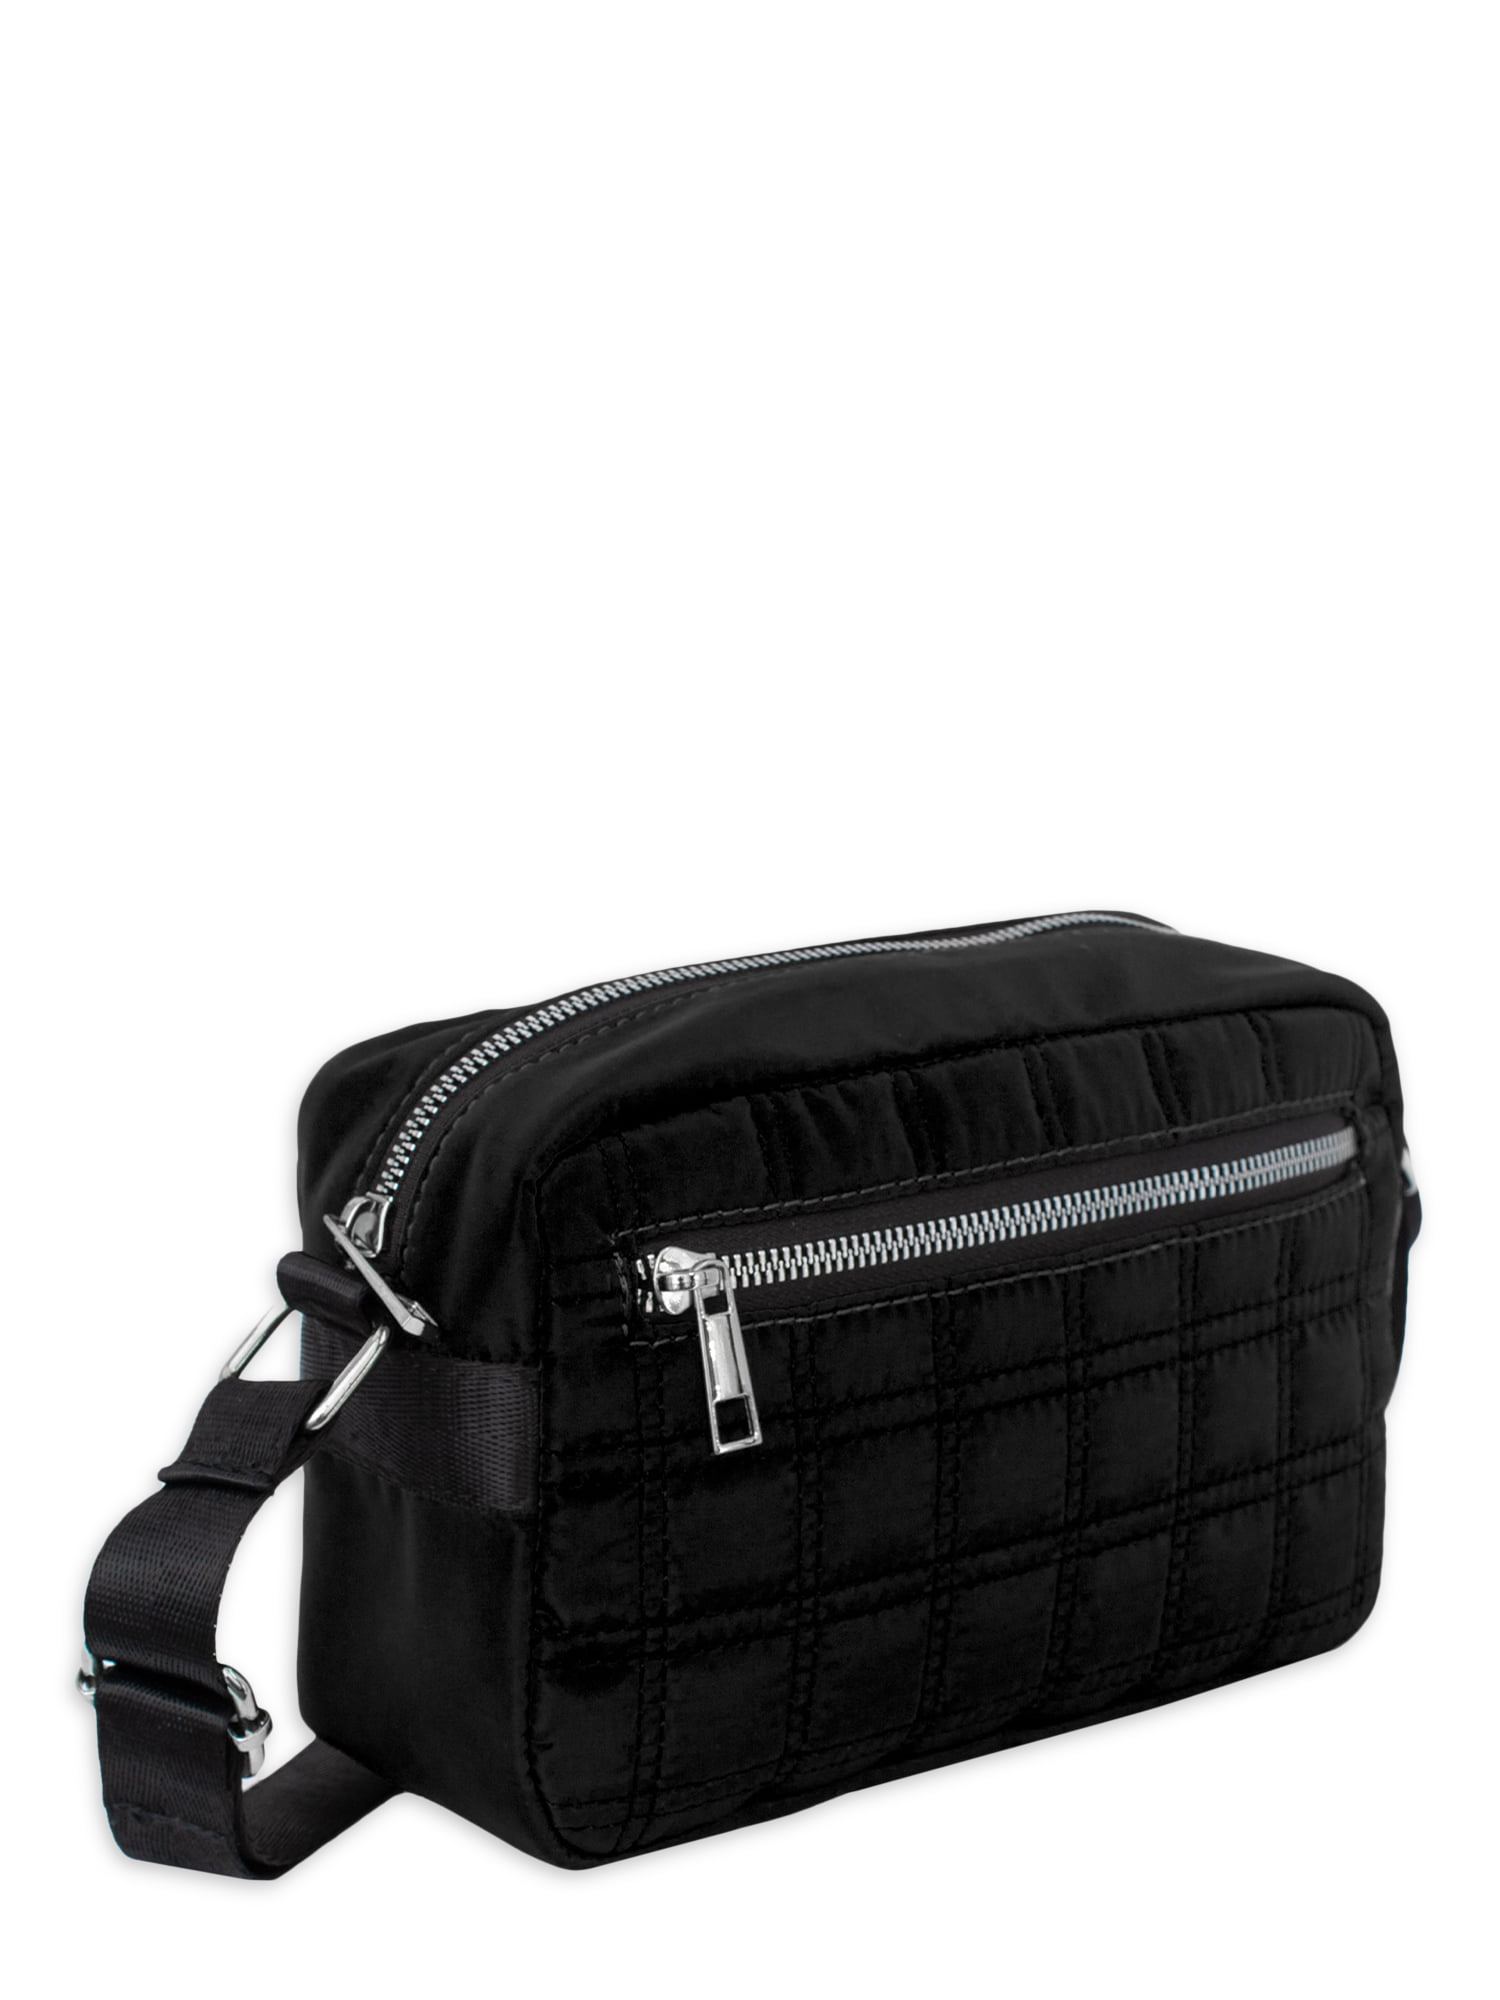 FashionPuzzle Quilted Nylon Crossbody Bag with Wide Strap (Black